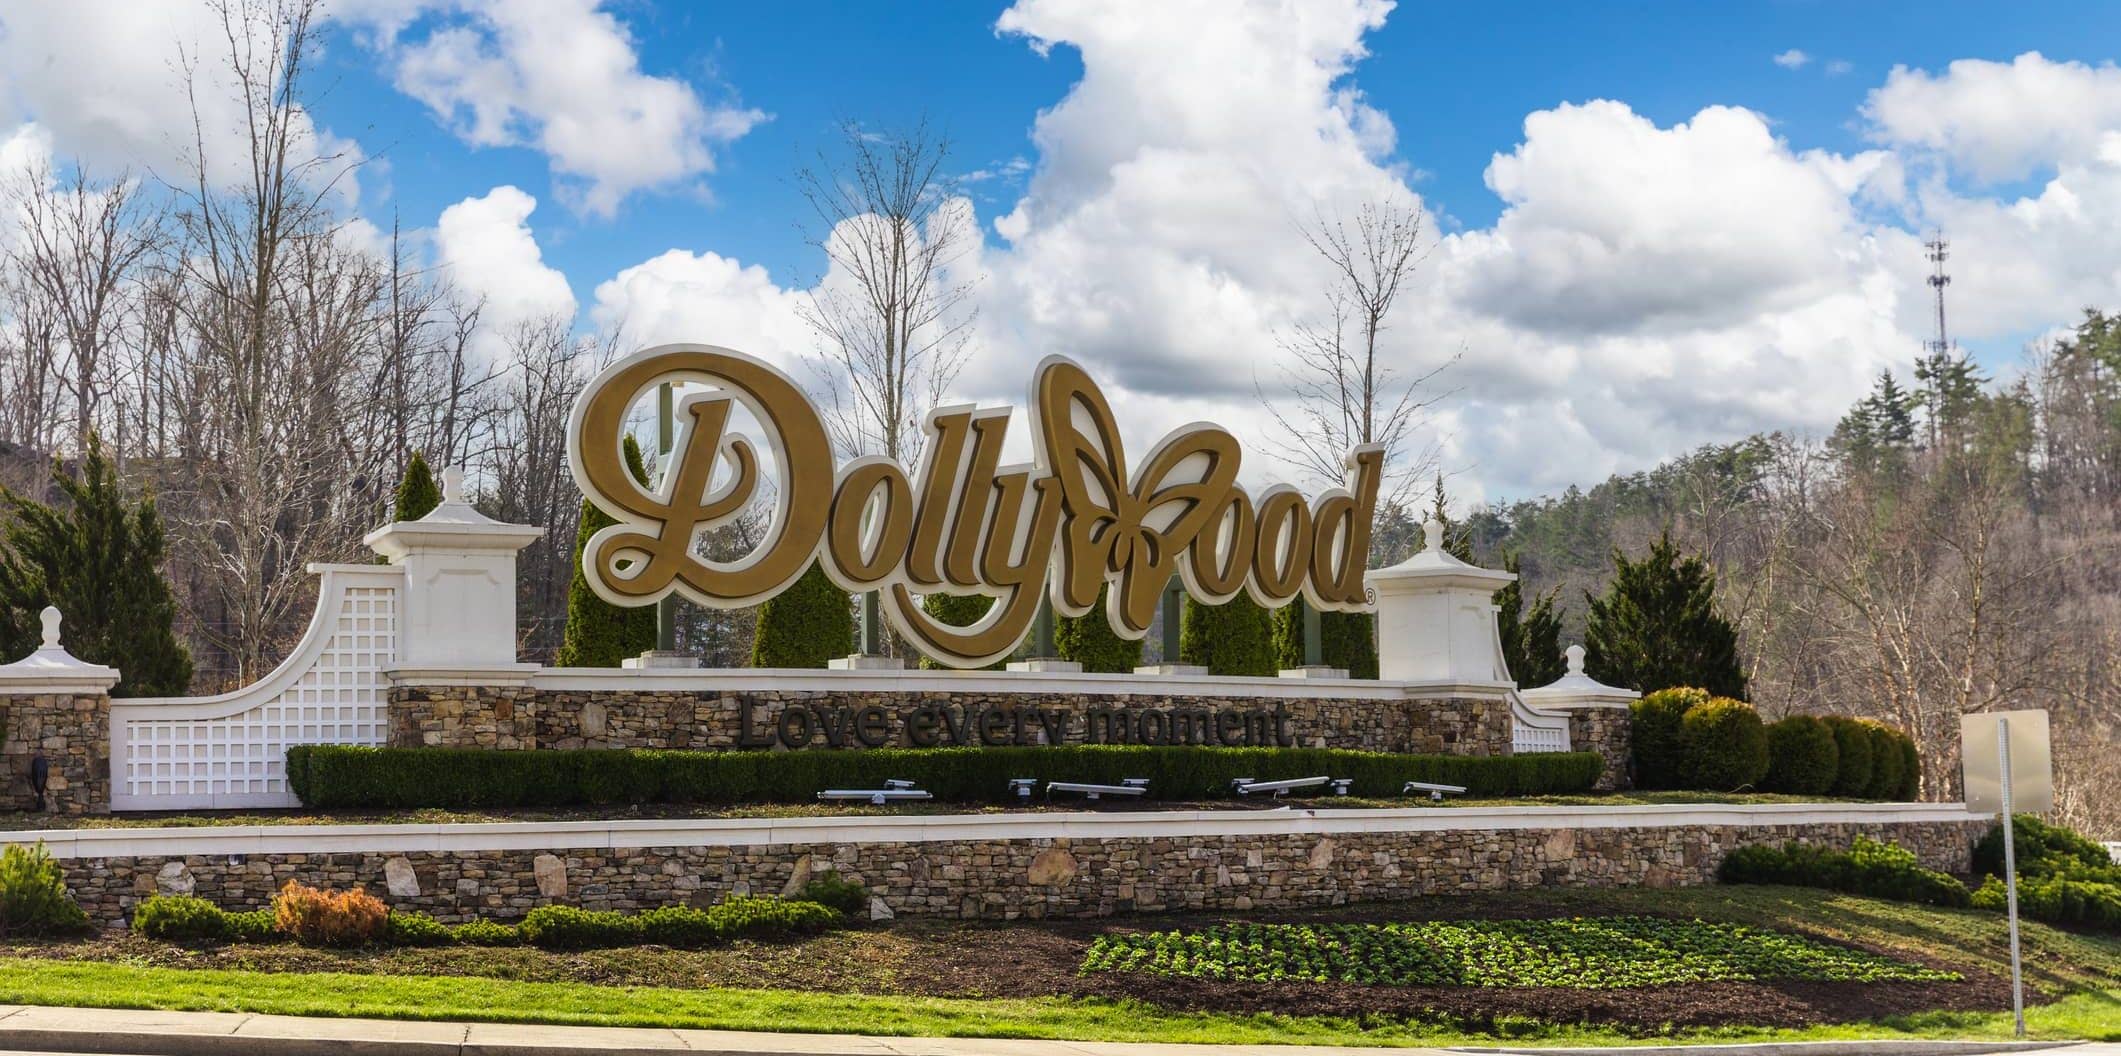 dollywood-sign-near-the-entrance-to-the-theme-park-in-pigeon-forge-tn